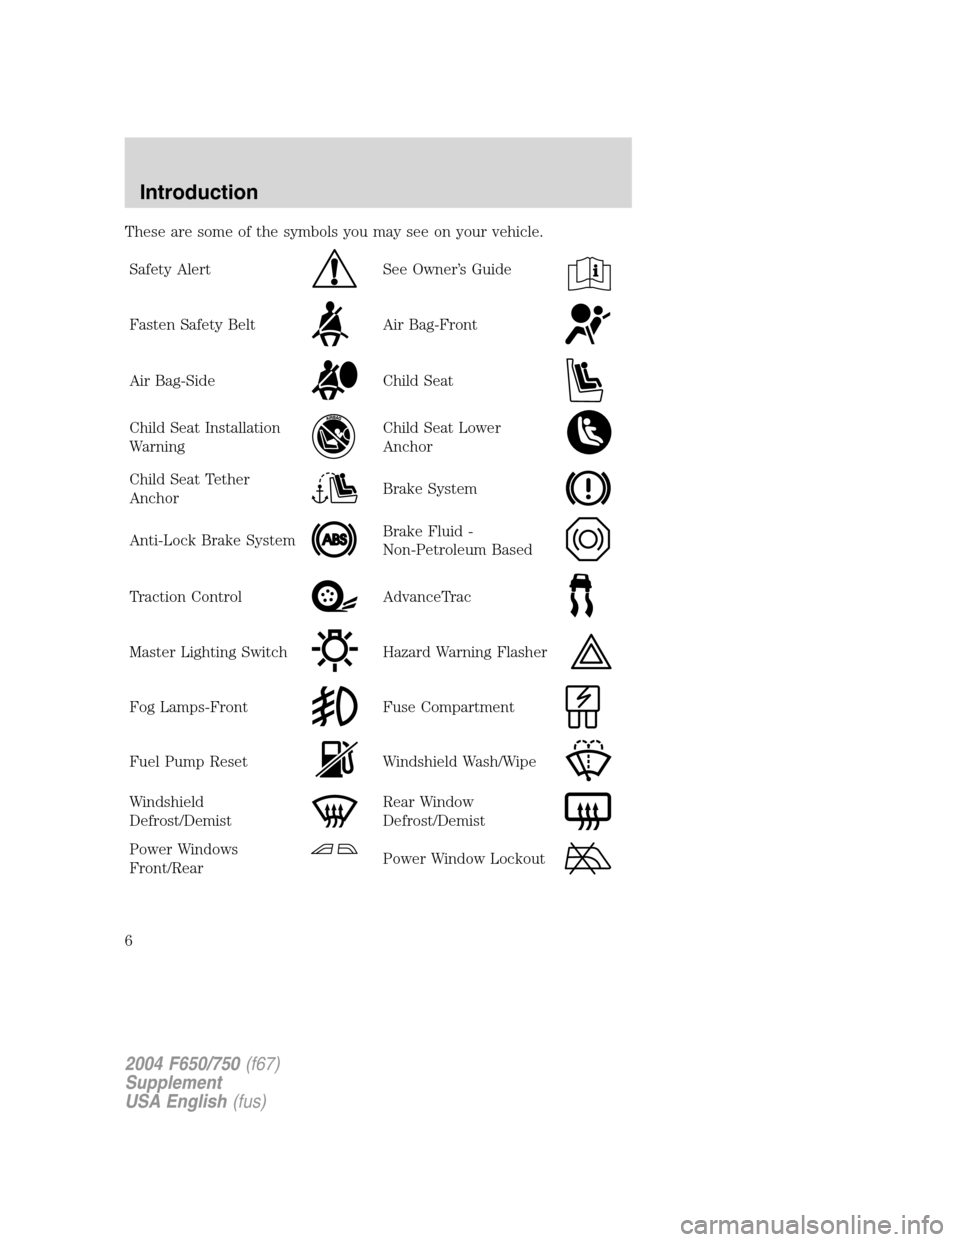 FORD F750 2004 11.G Owners Manual These are some of the symbols you may see on your vehicle.
Safety Alert
See Owner’s Guide
Fasten Safety BeltAir Bag-Front
Air Bag-SideChild Seat
Child Seat Installation
WarningChild Seat Lower
Ancho